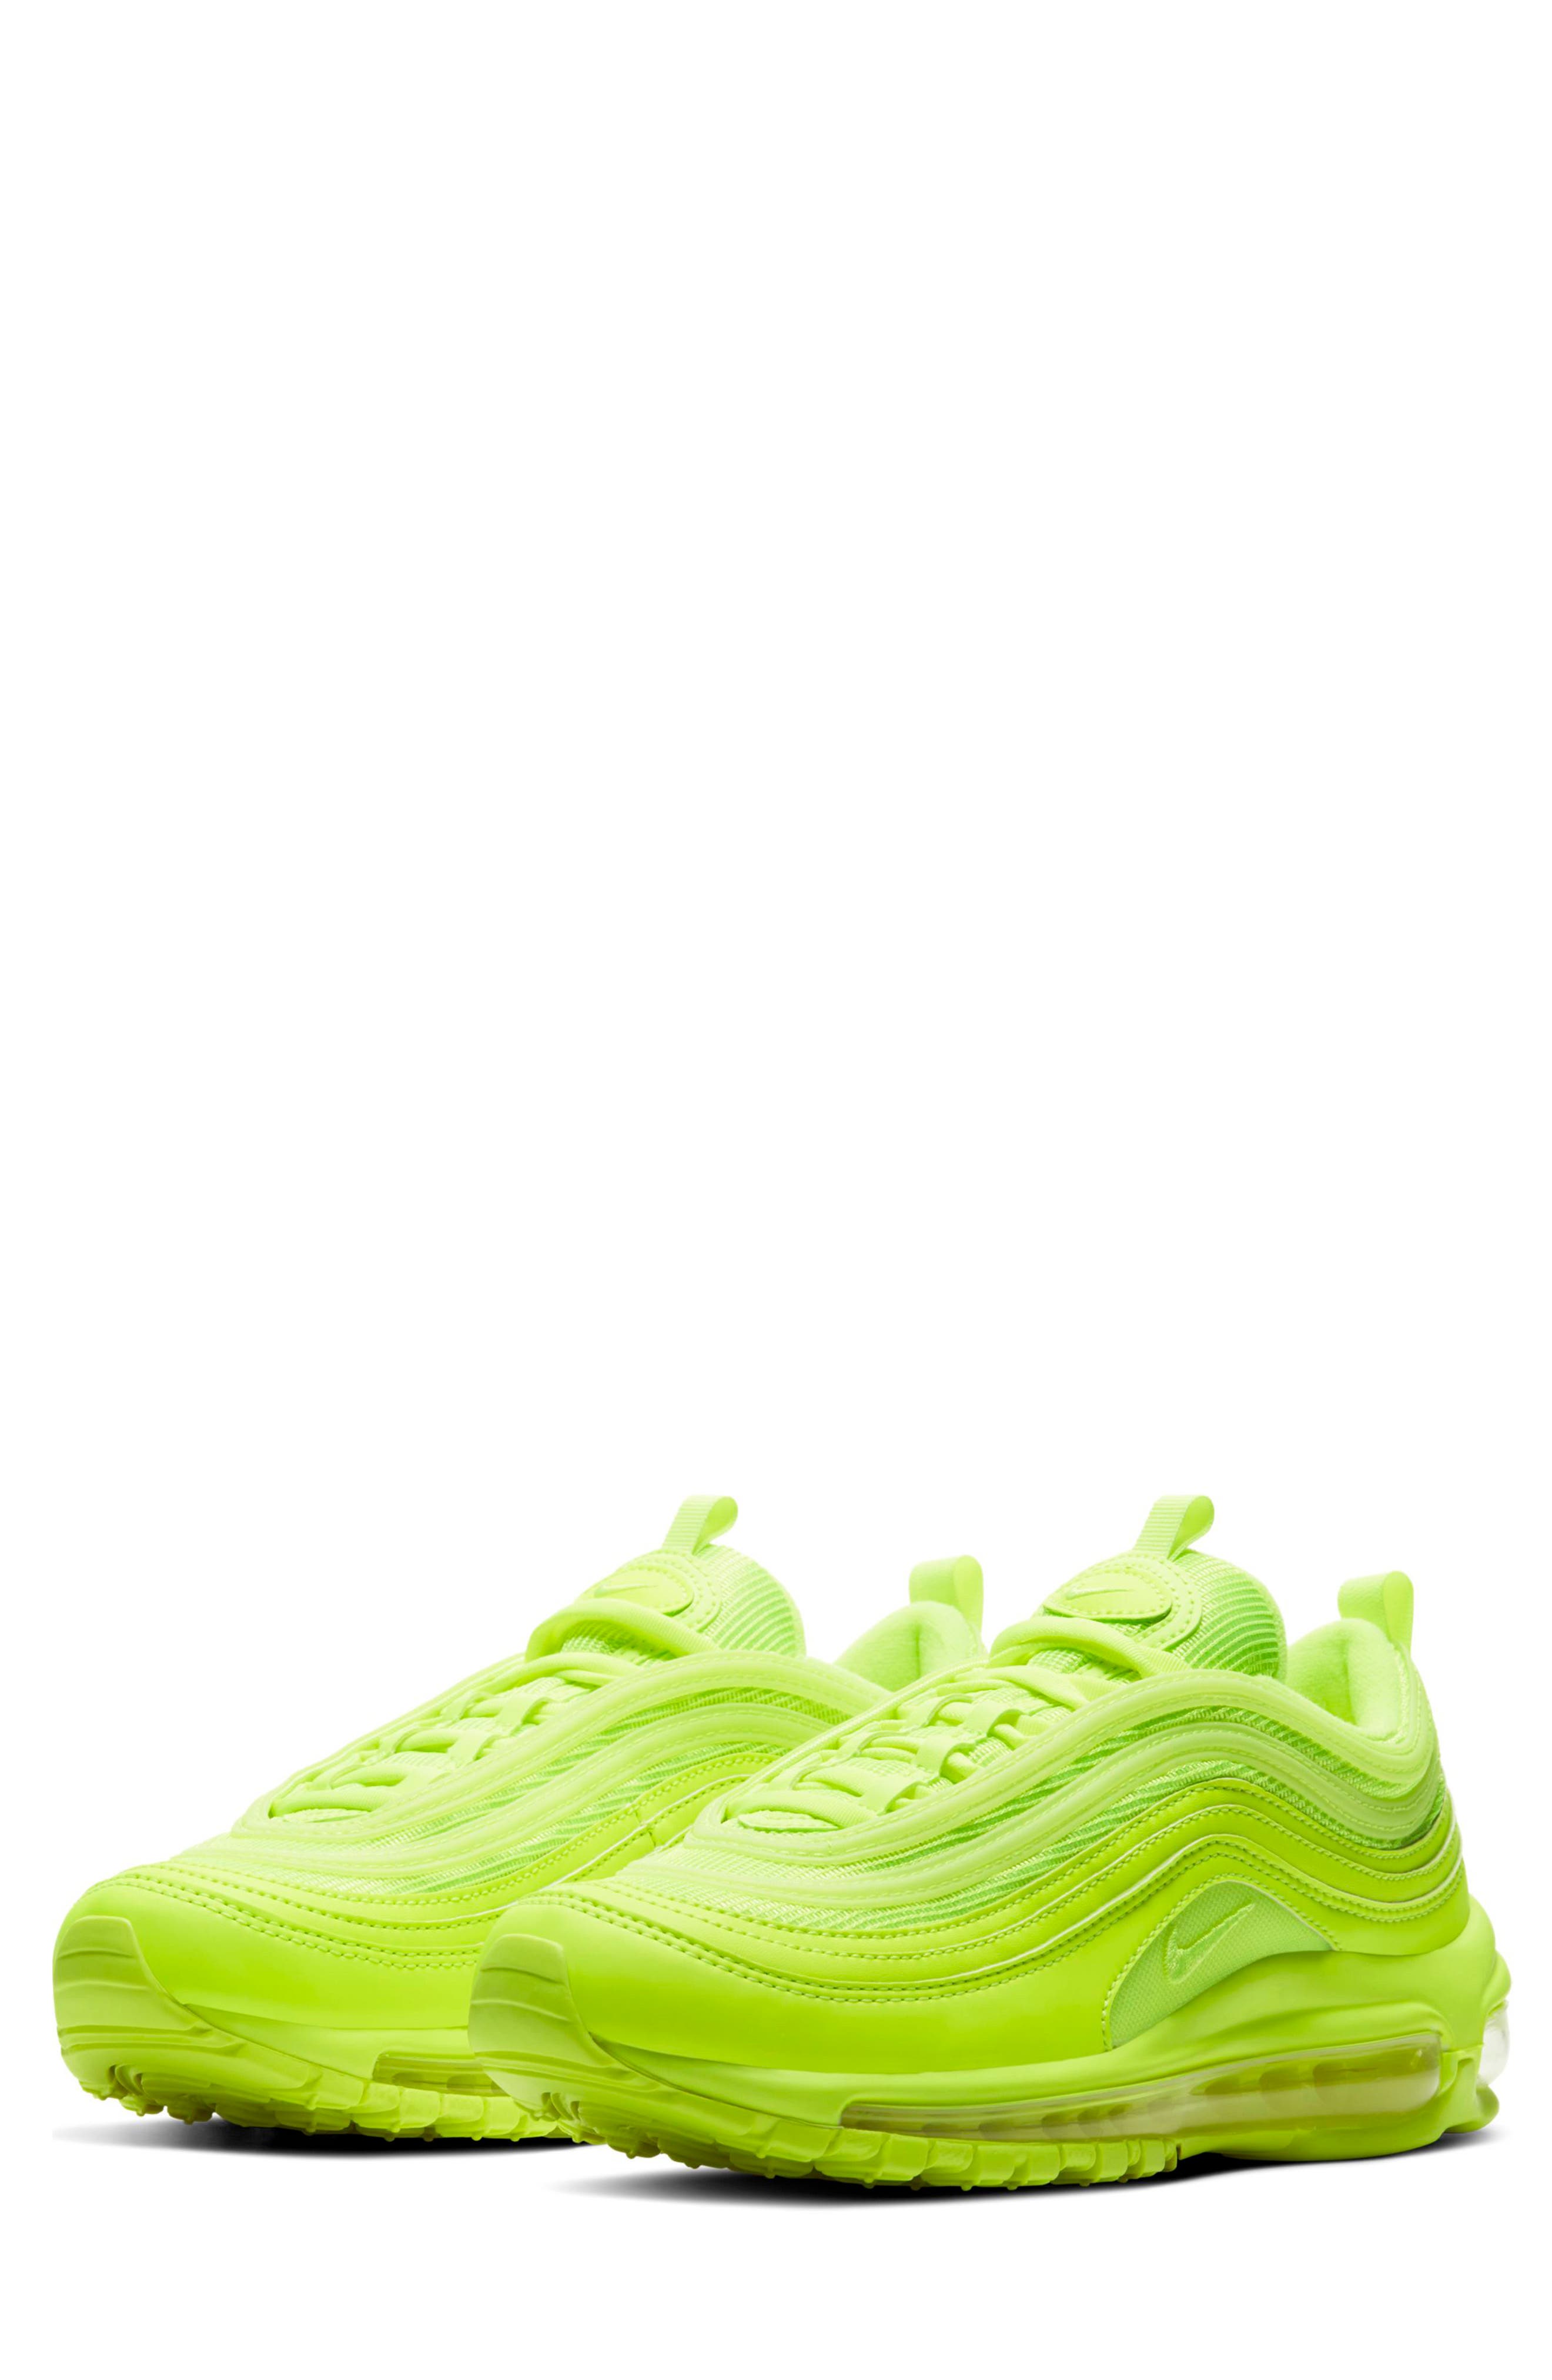 UPC 194274400694 product image for Women's Nike Air Max 97 Sneaker, Size 9 M - Yellow | upcitemdb.com